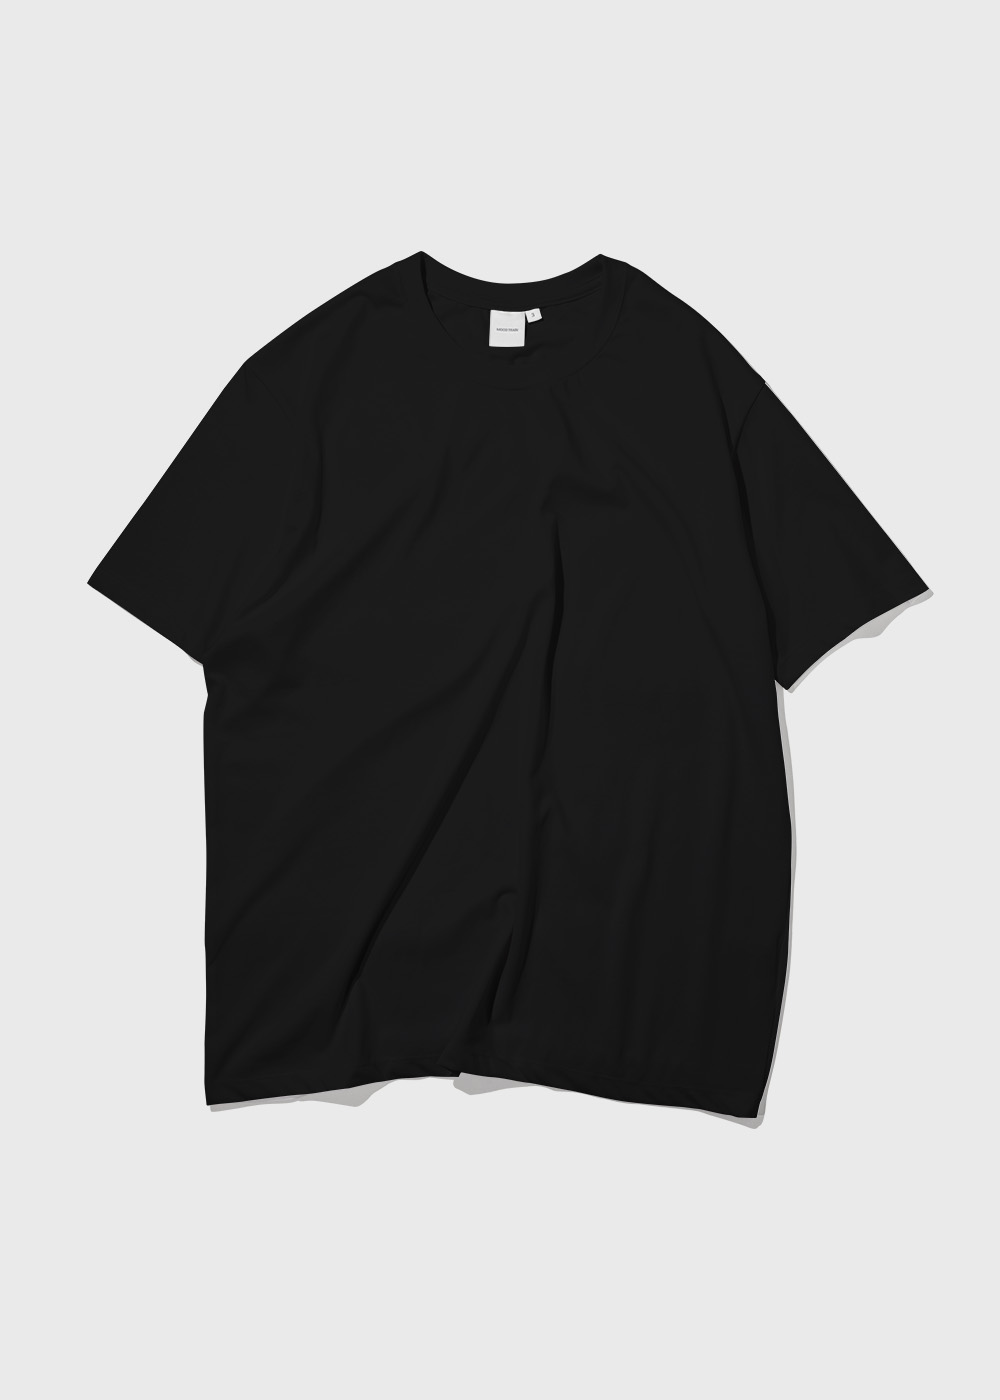 H. Enzymed Carded Cotton-Polyester Blended 20/1 Single T-shirt _ black